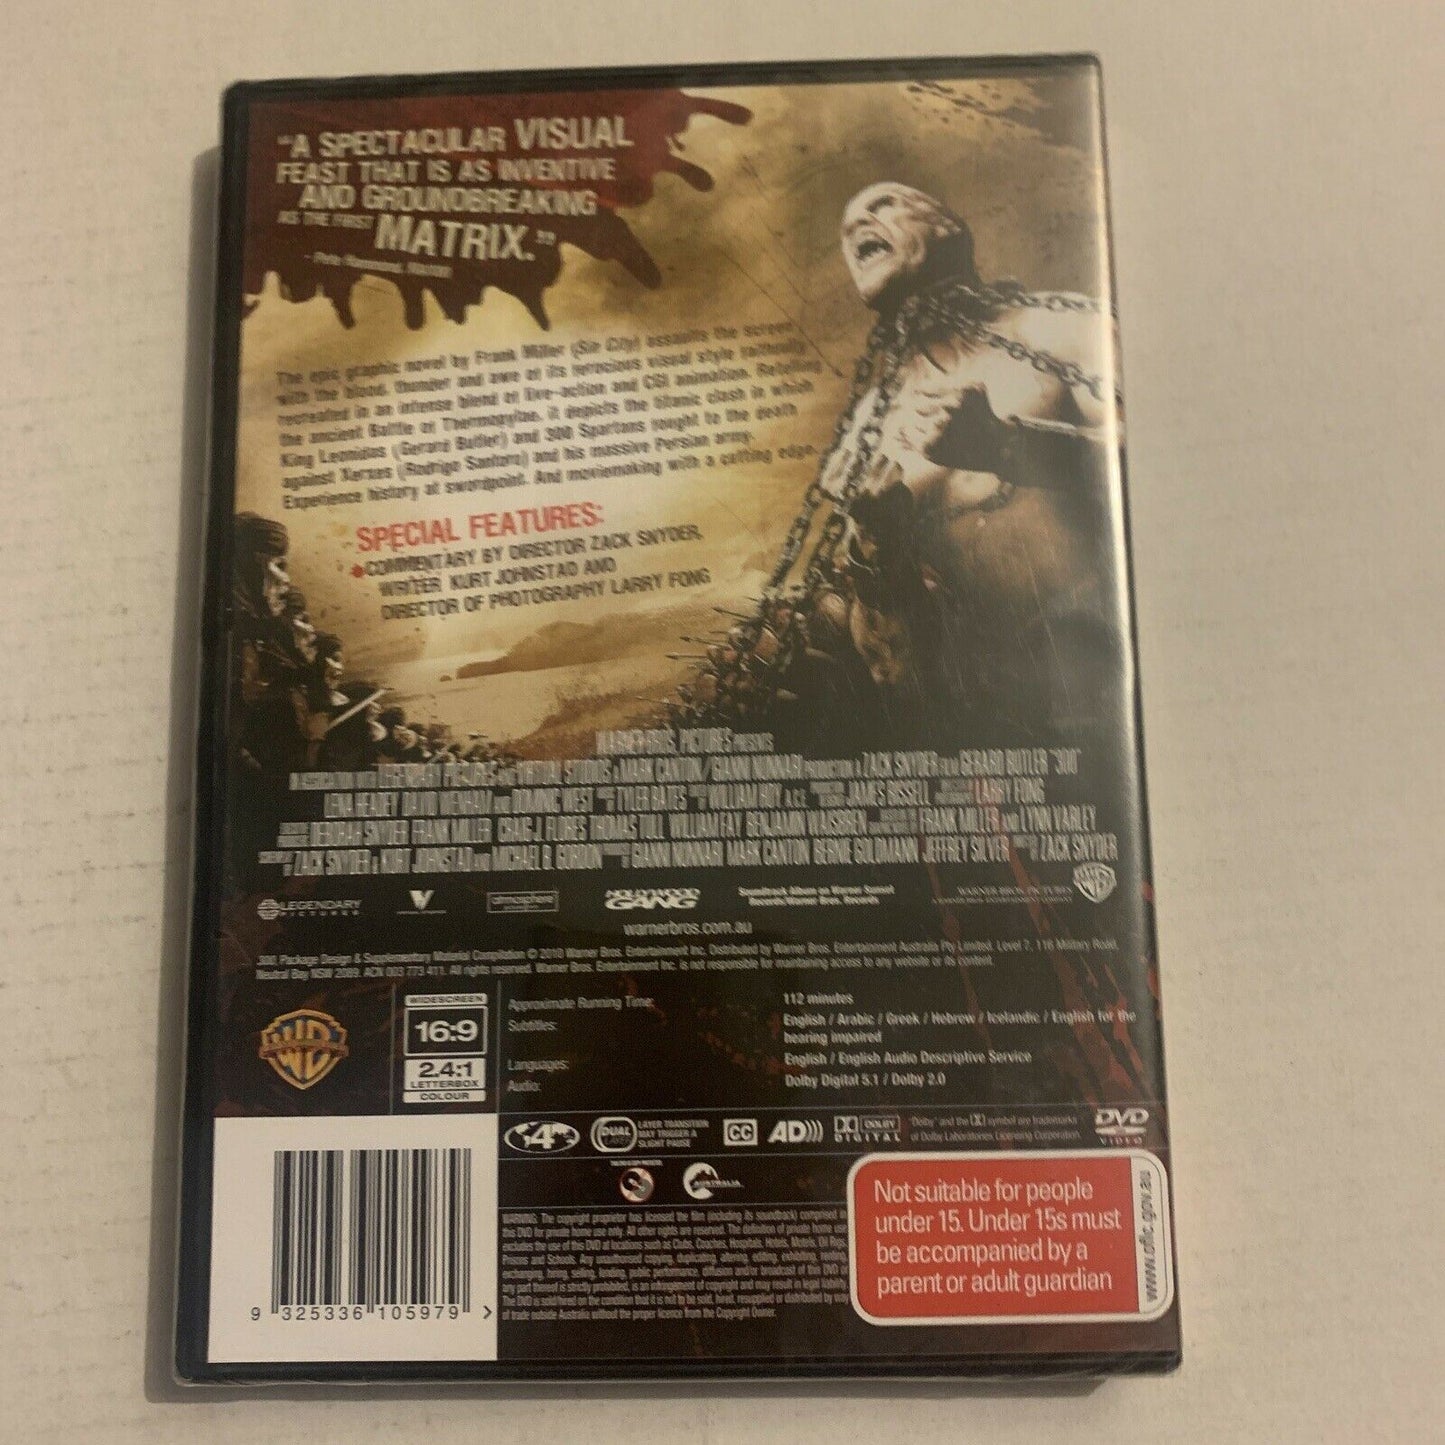 *New Sealed* 300 - Widescreen Edition (DVD, 2010) Region 4